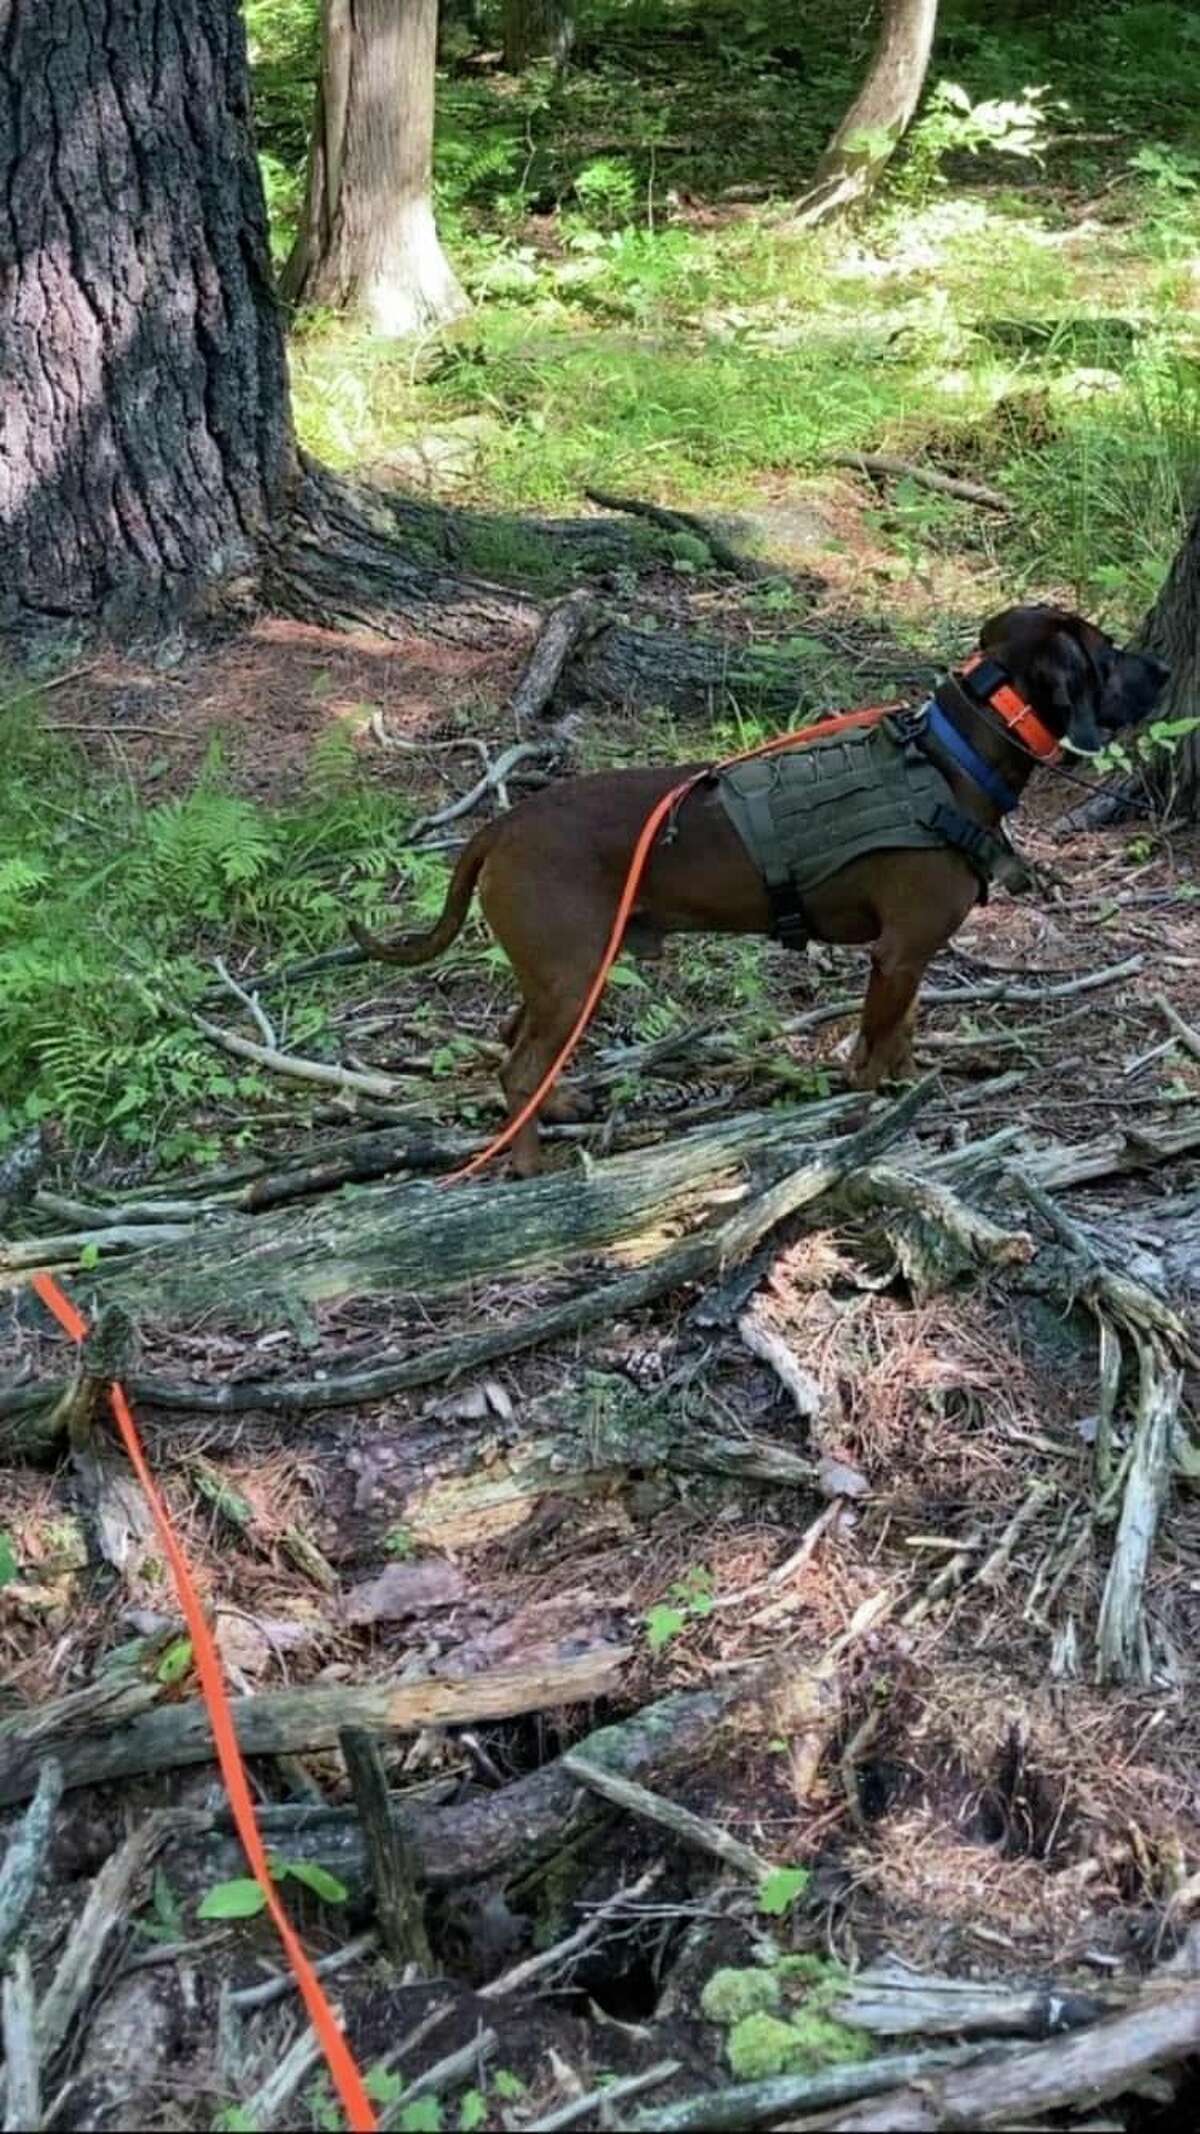 Ron Richter's dog, Bandit, a Bavarian Mountain Dog who is just over three years old, started tracking training in October 2020 when he was just one and a half years old. 